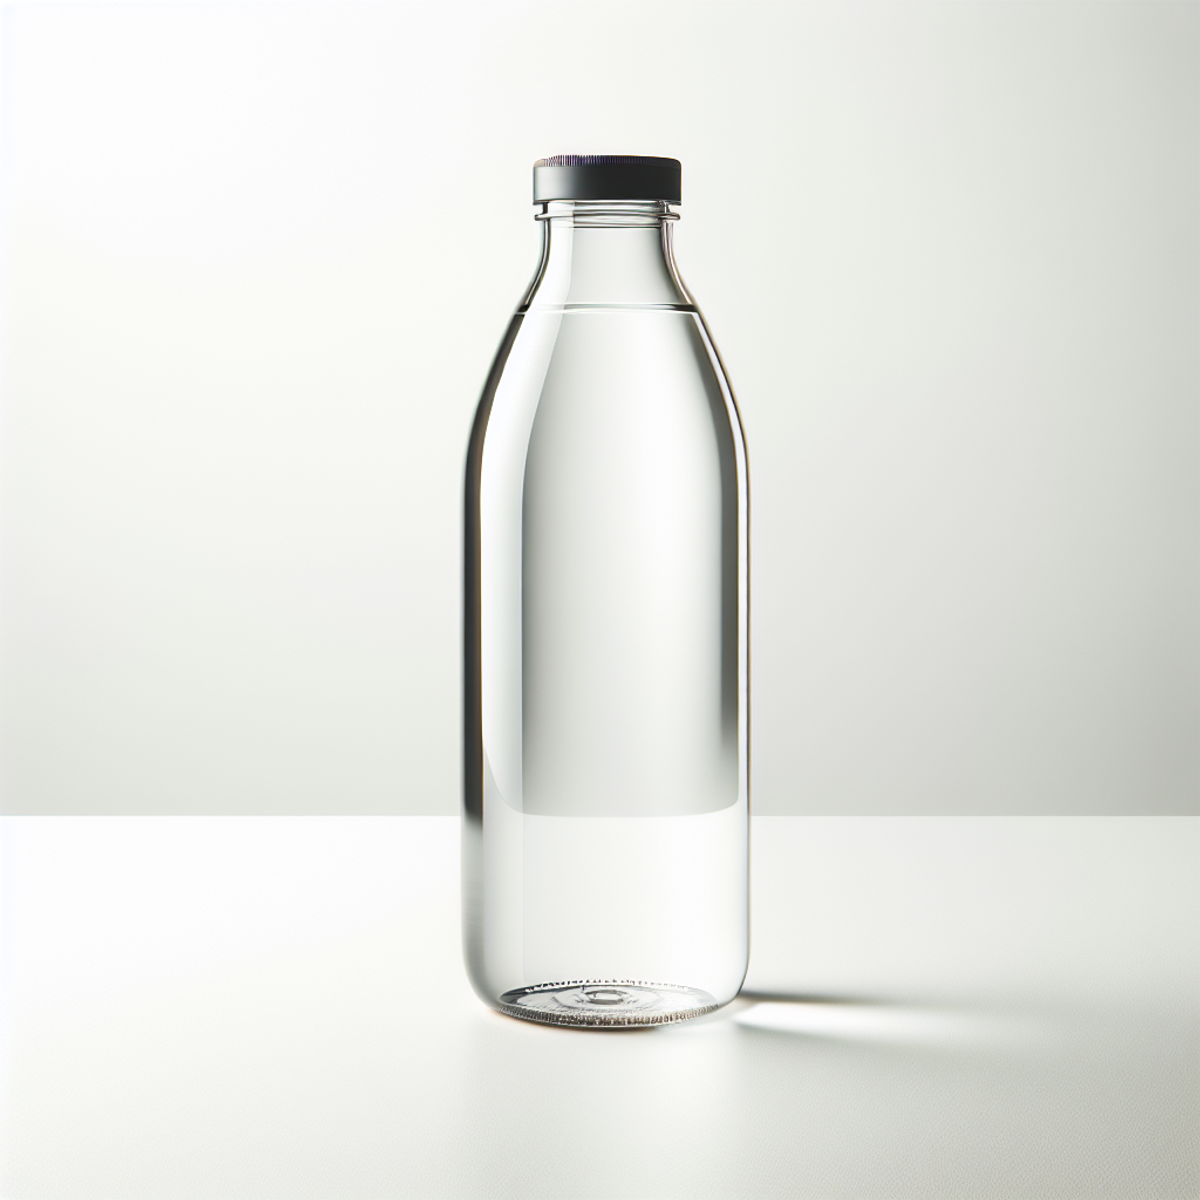 A modern glass water bottle with a minimalistic design, sitting on a white backdrop.